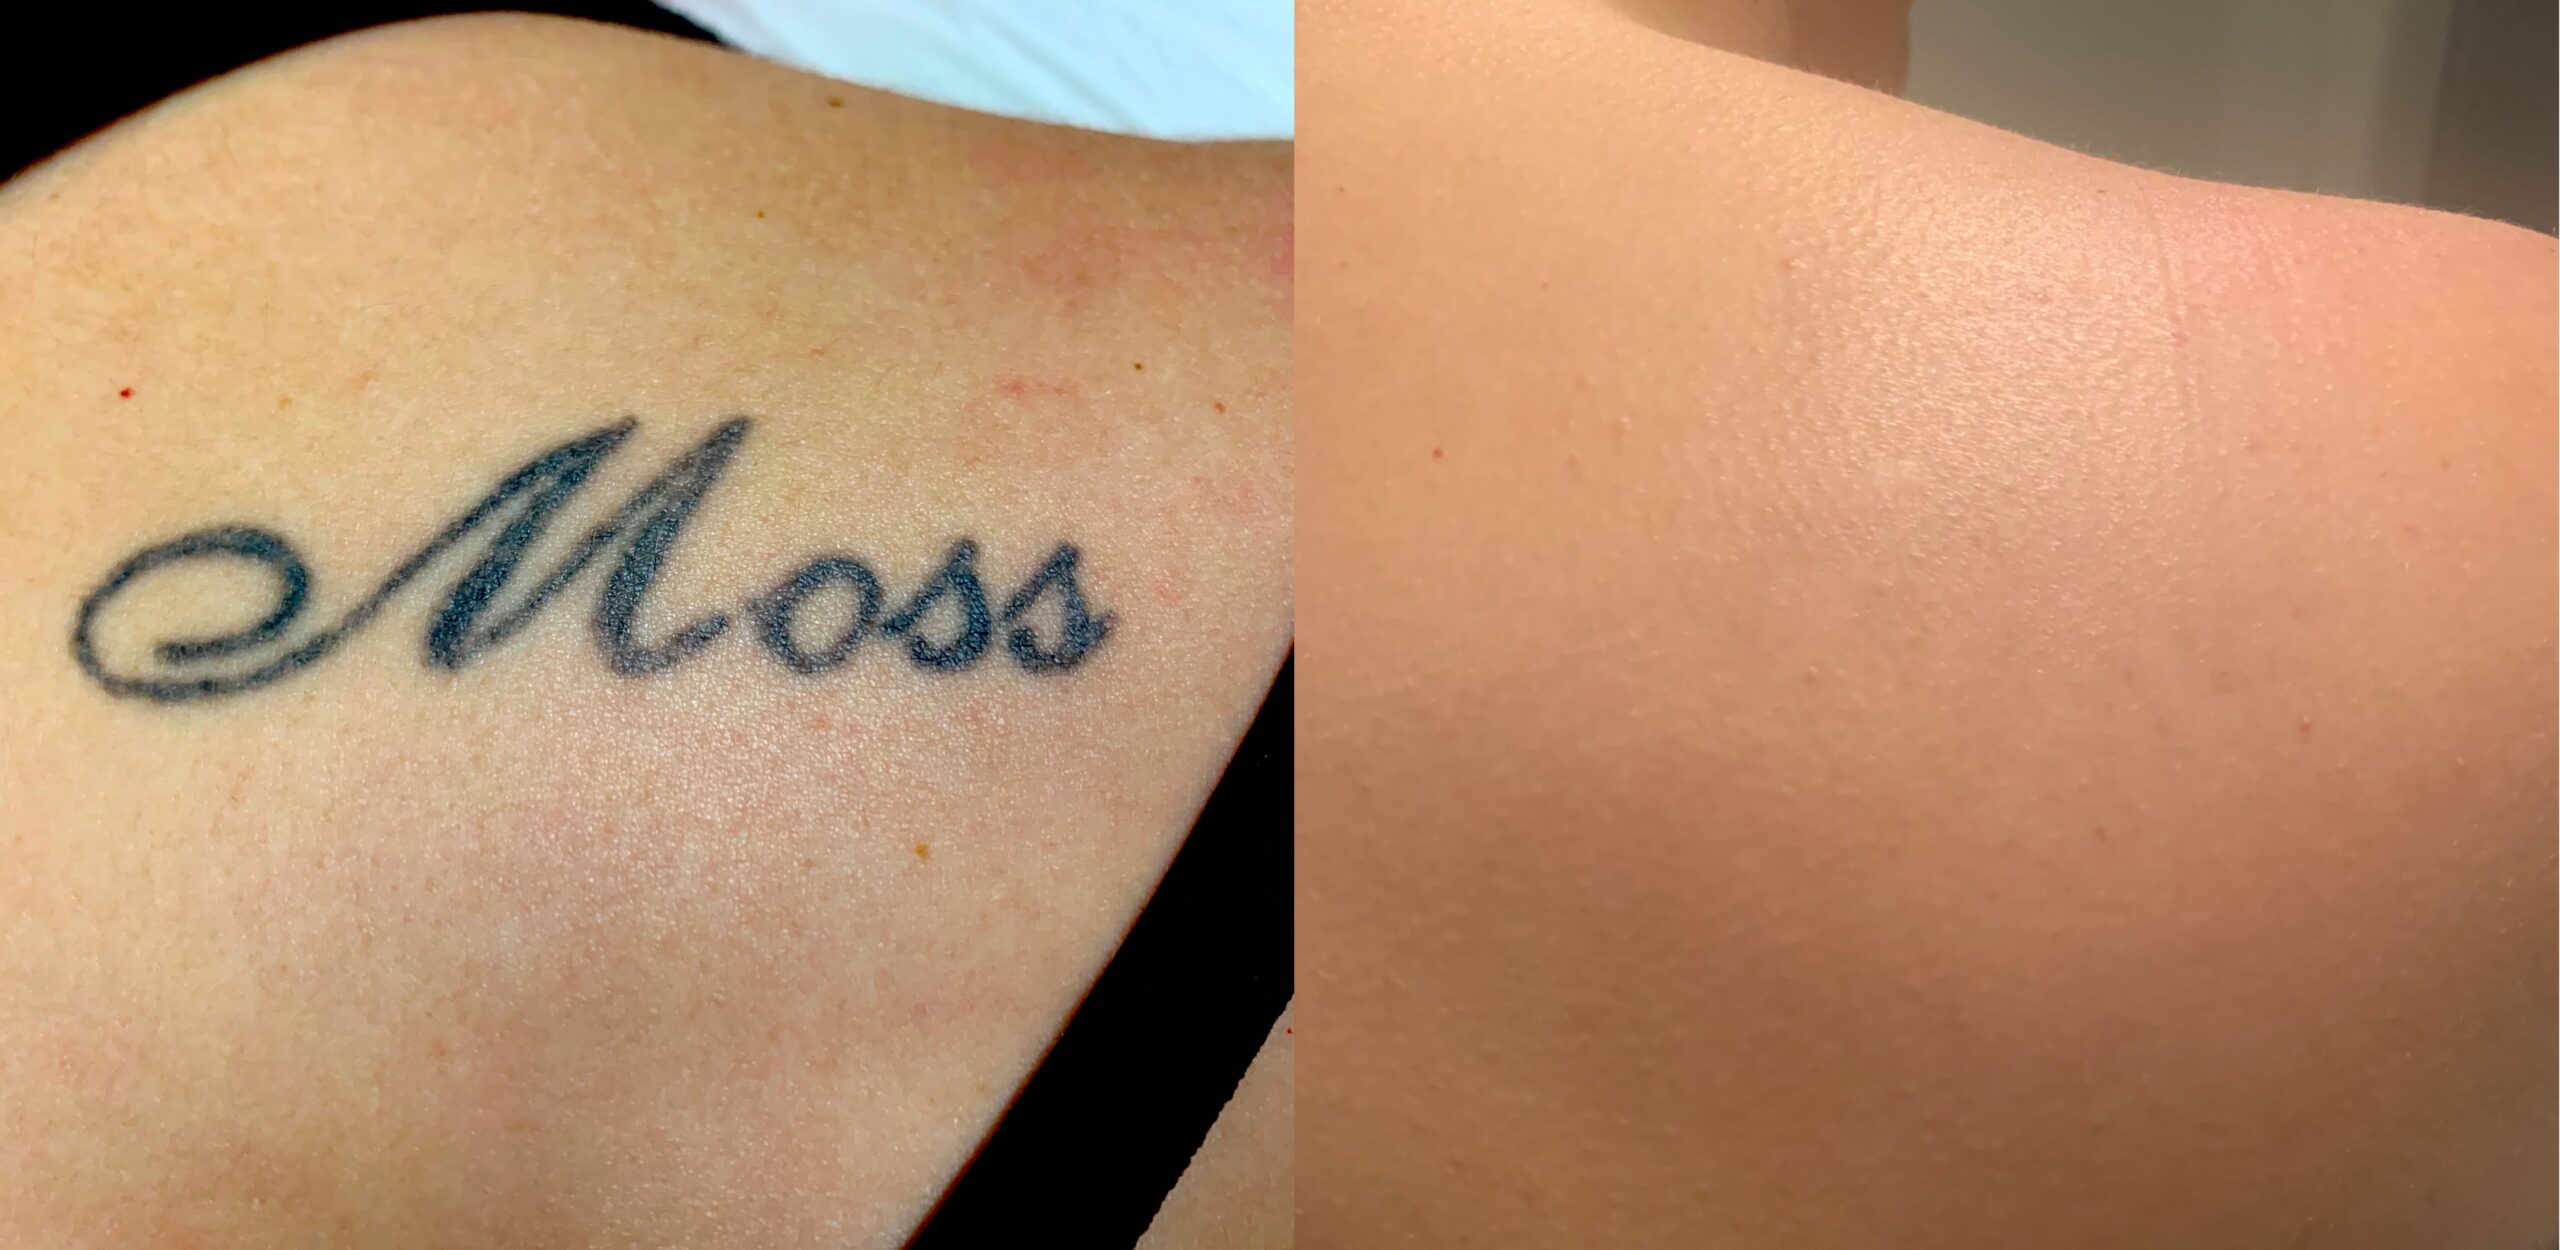 Tattoo removal services, full tattoo removal, tatoo removal for coverup, fading a tattoo for coverup